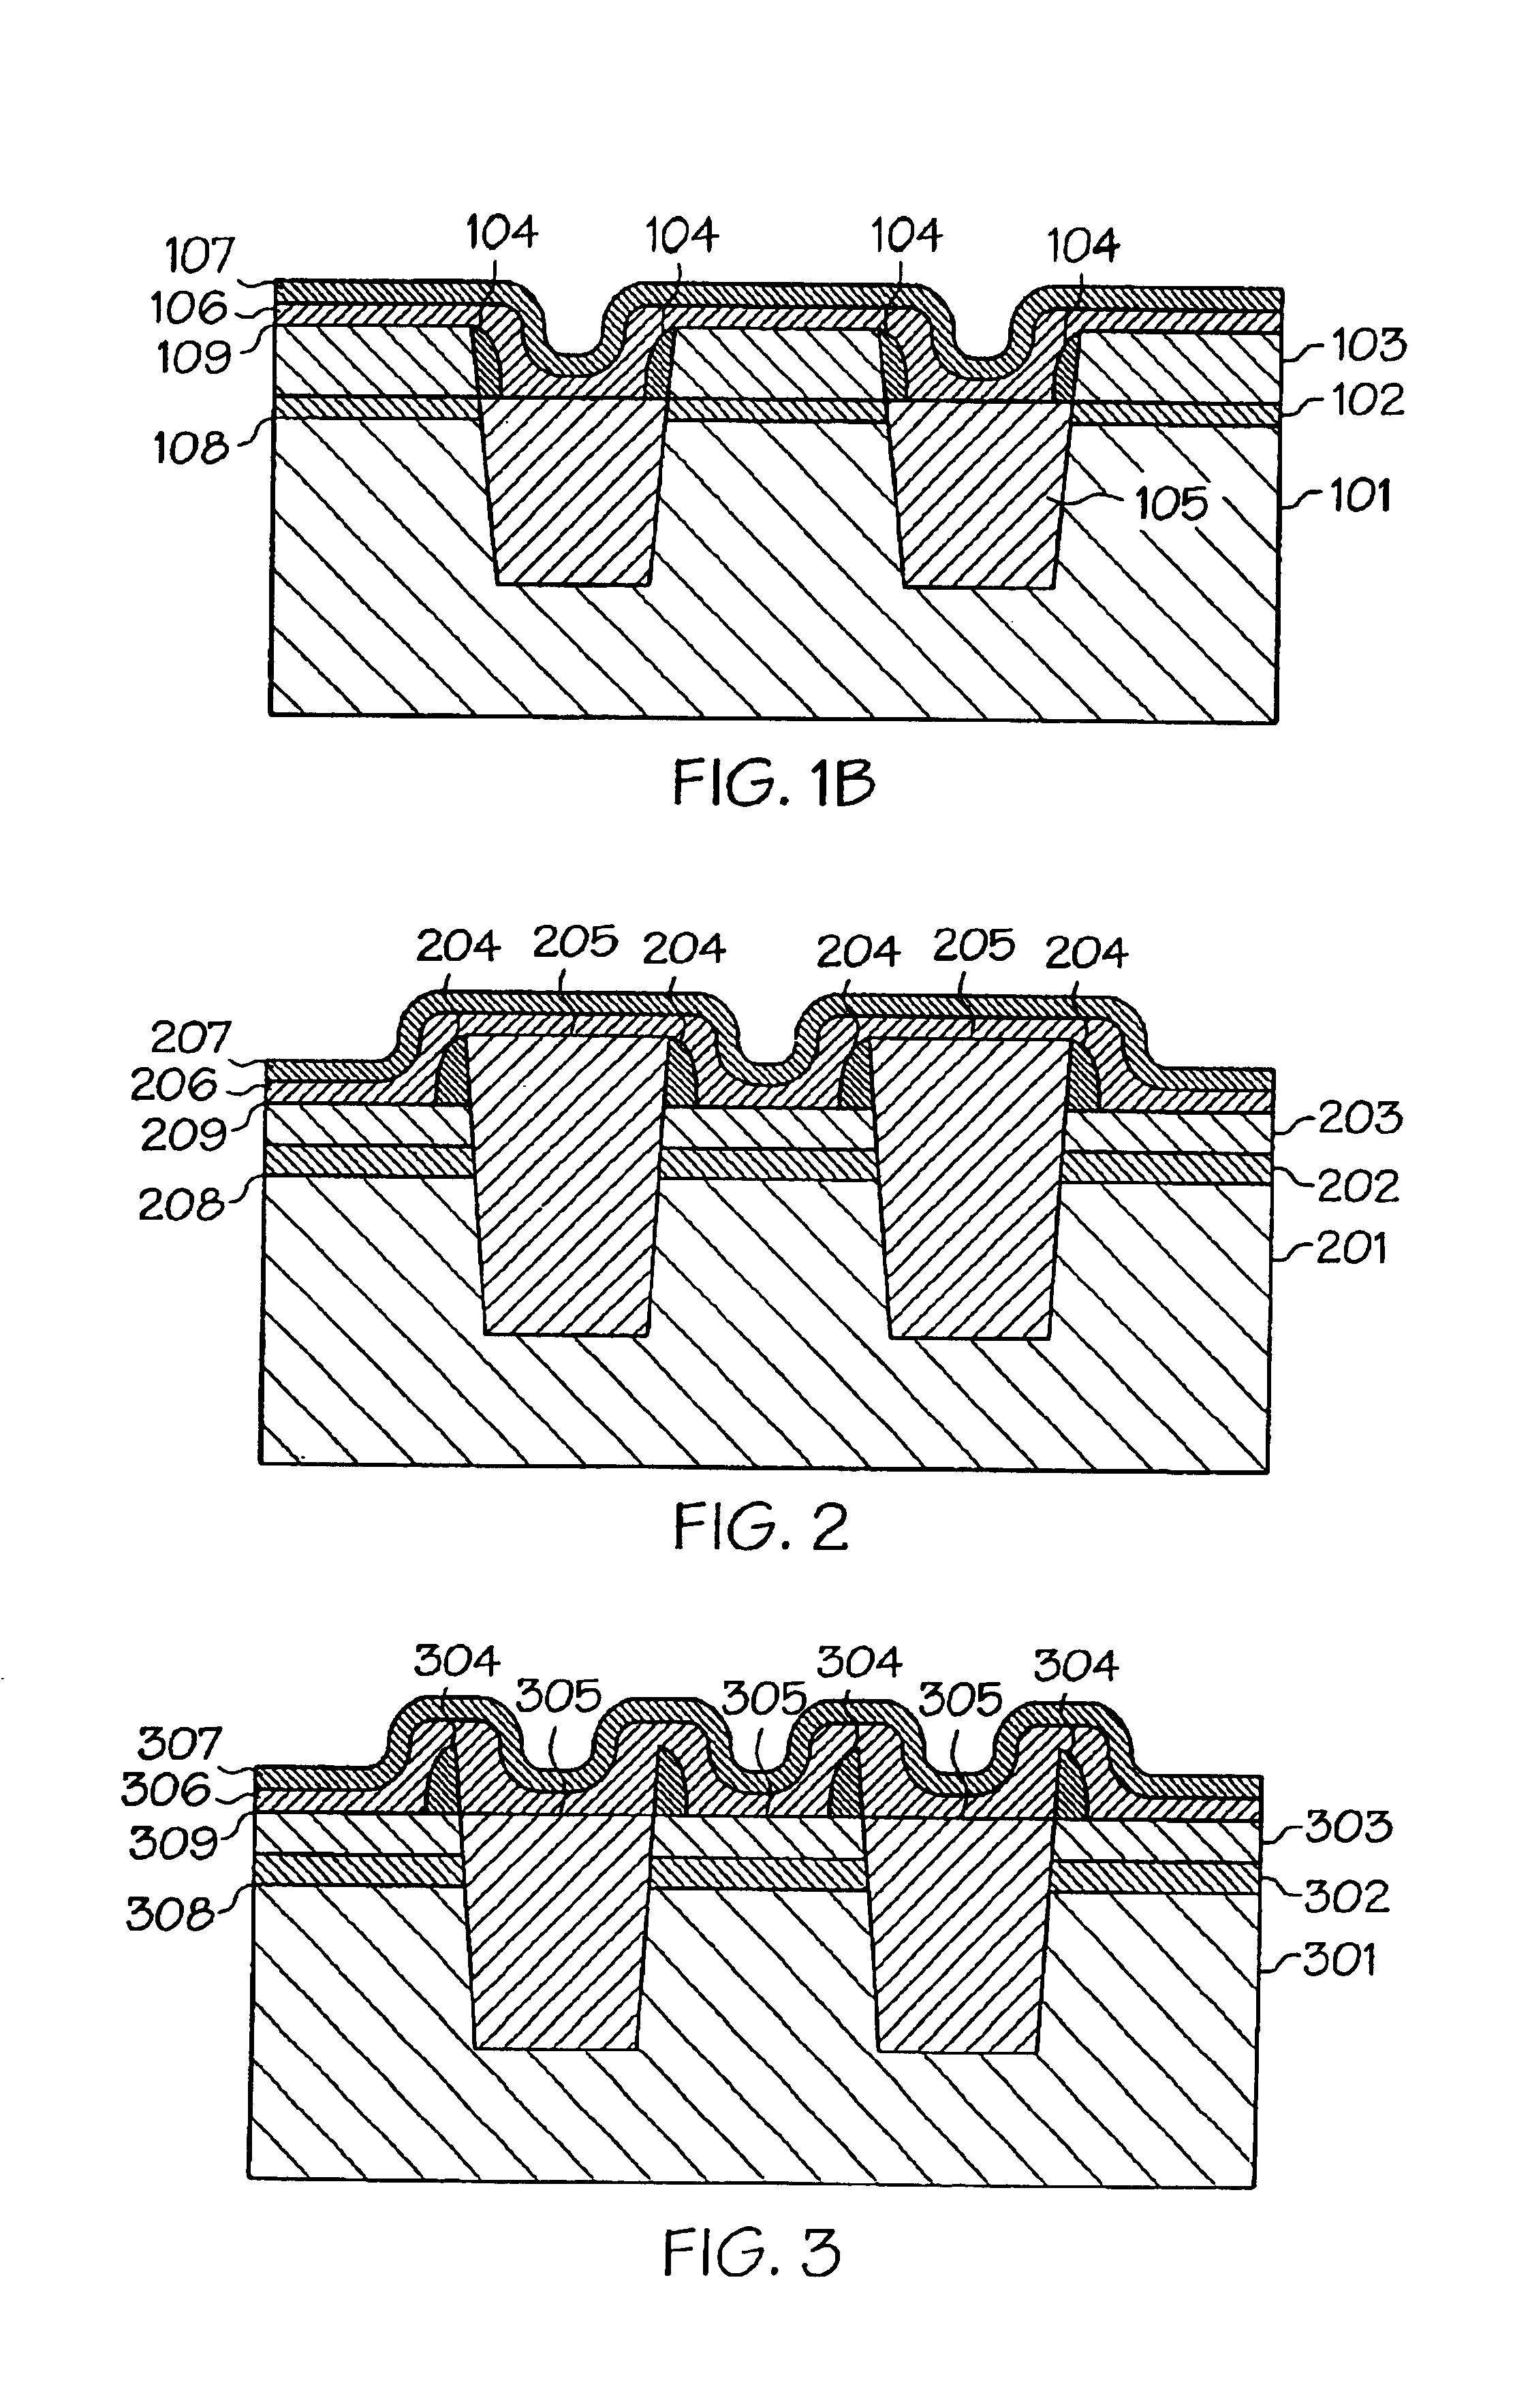 Stacked gate region of a memory cell in a memory device